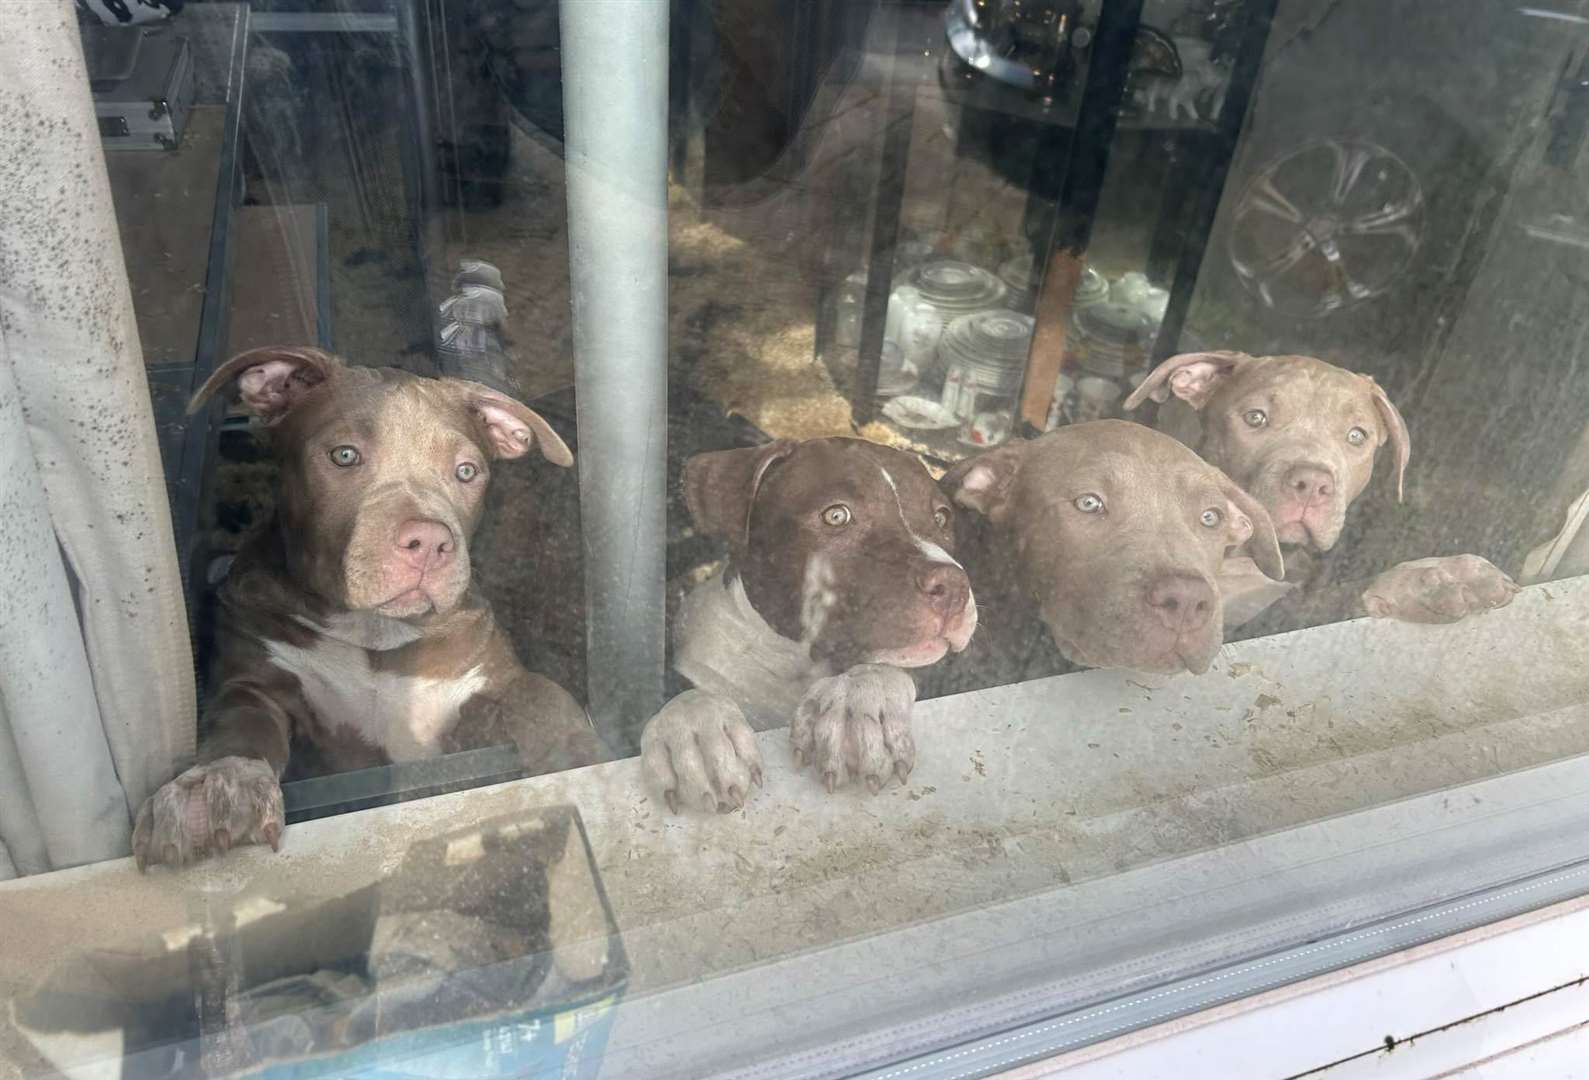 Four of the young XL Bullies looking out of the window